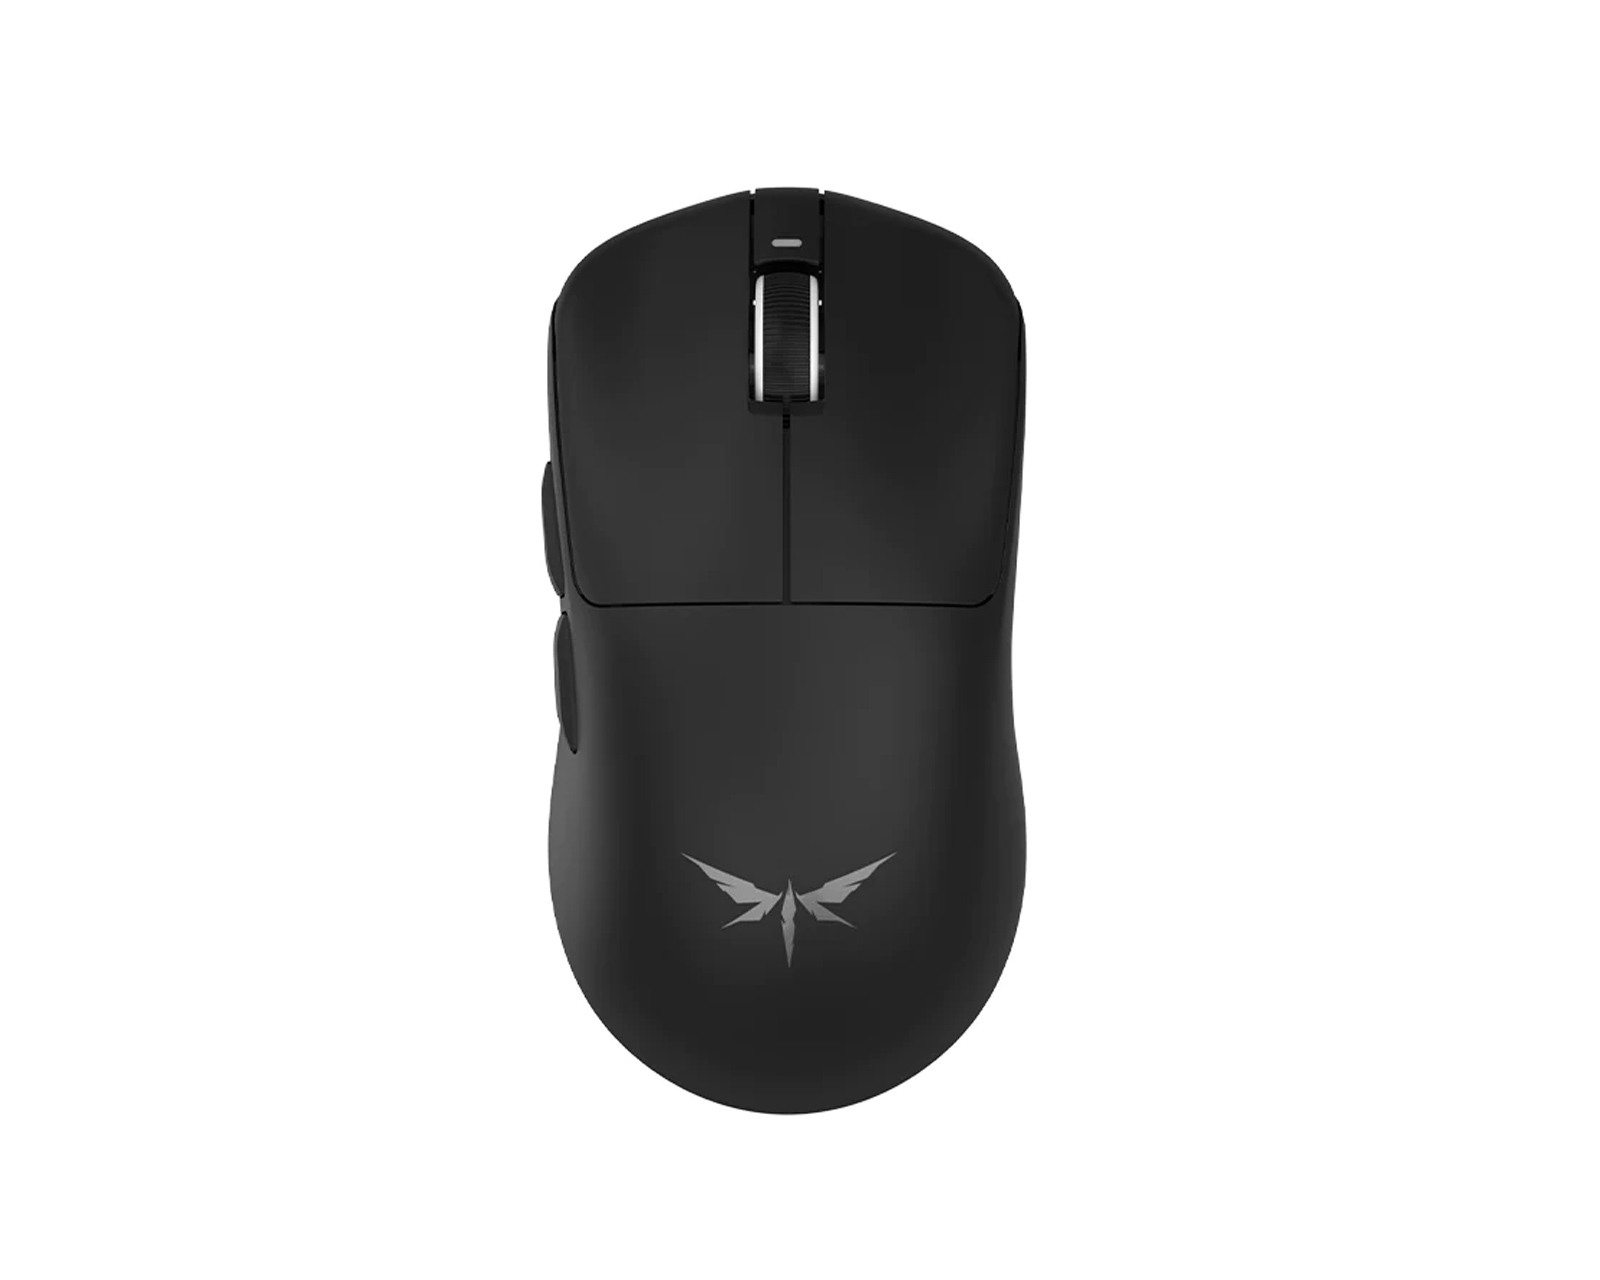 VGN Dragonfly F1 MOBA Wireless Gaming Mouse - Black